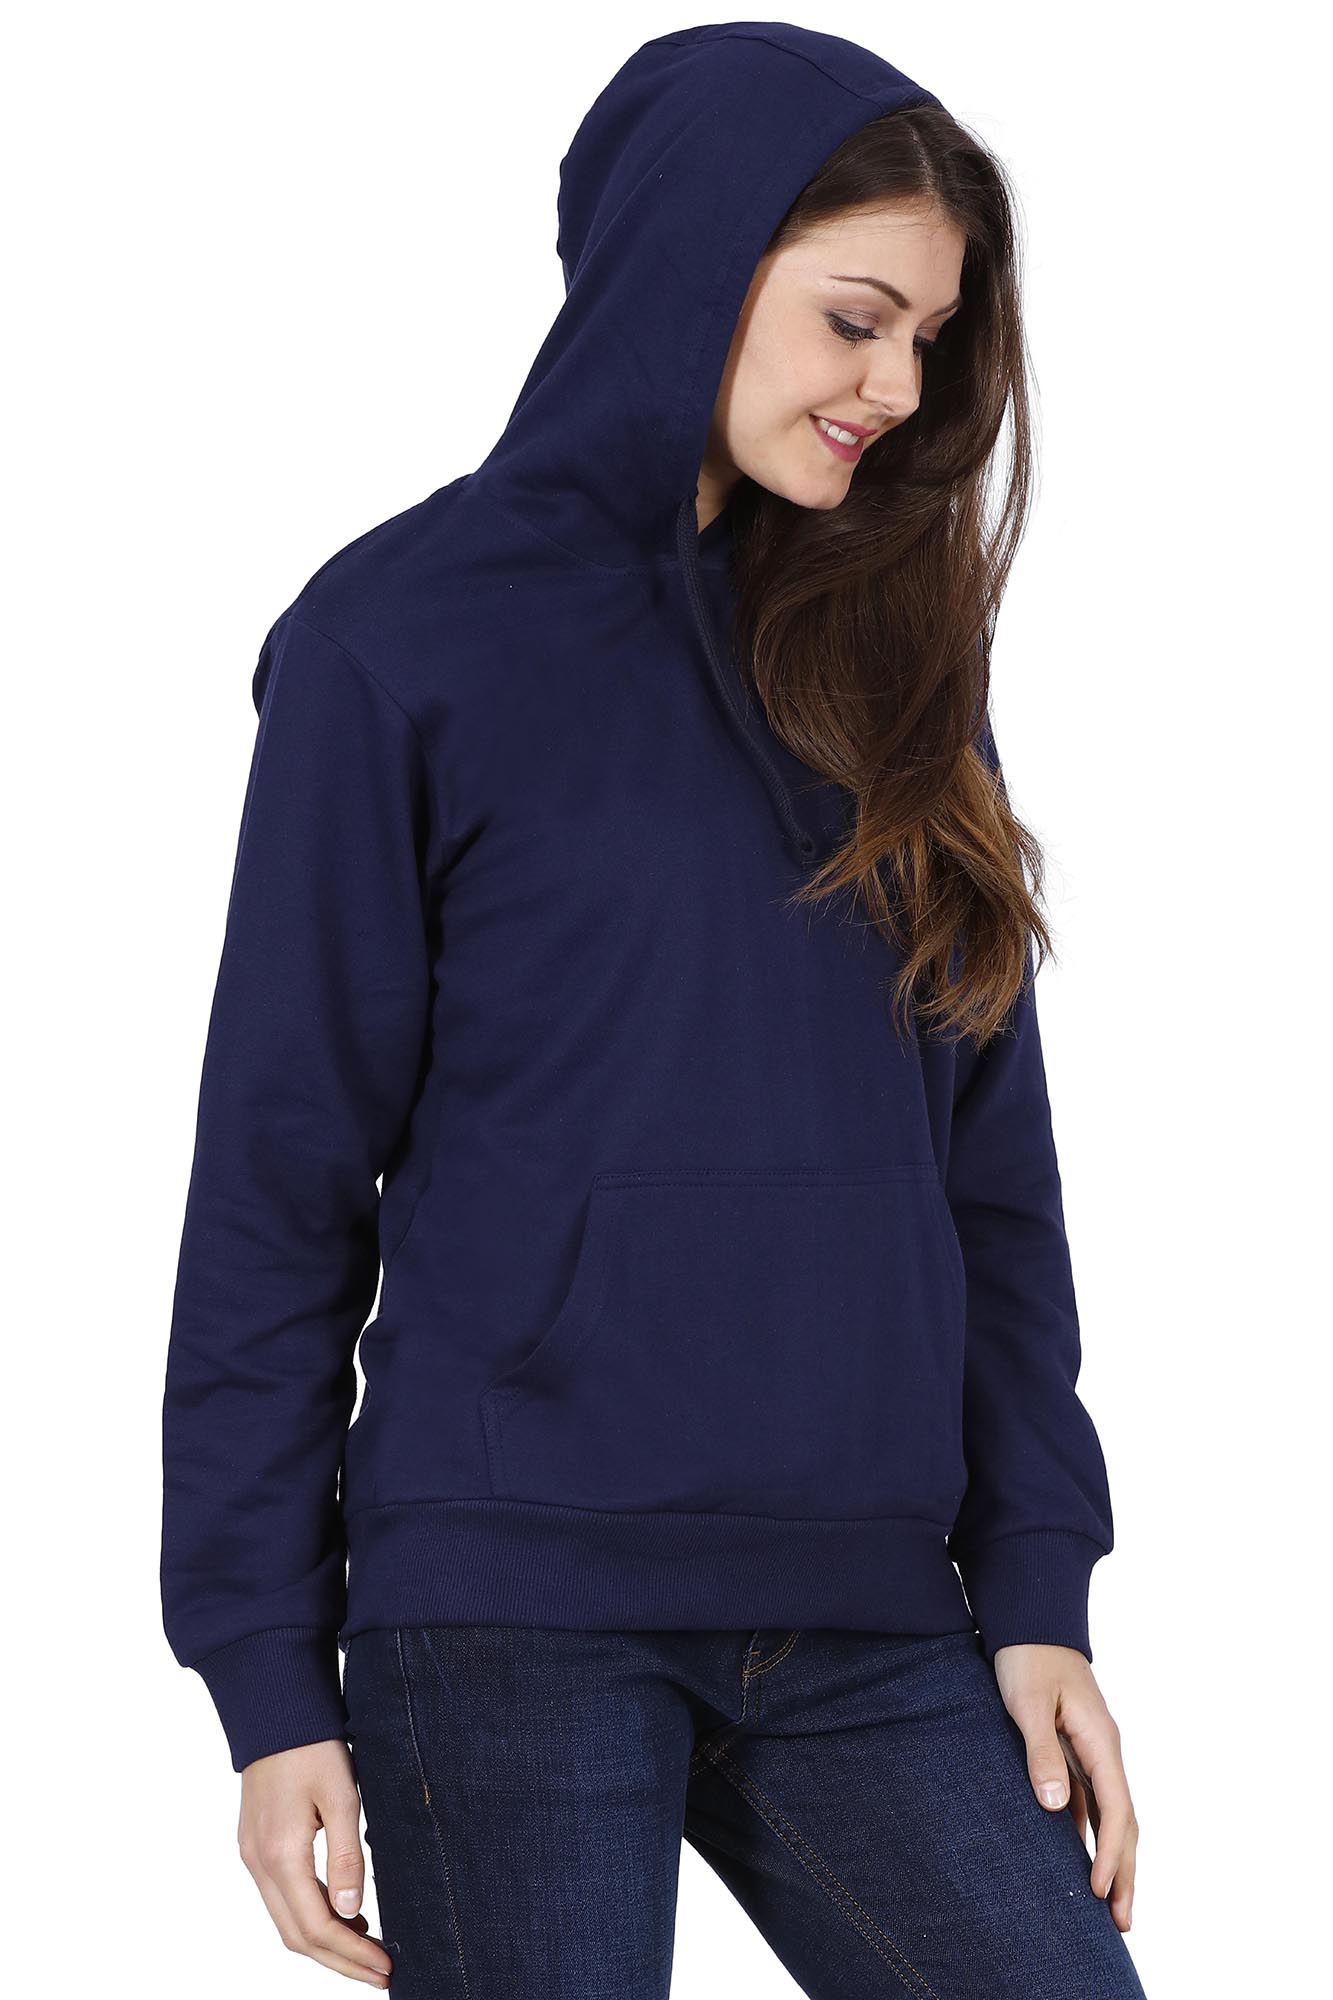 PLAIN HOODIE FOR HER - NAVY BLUE